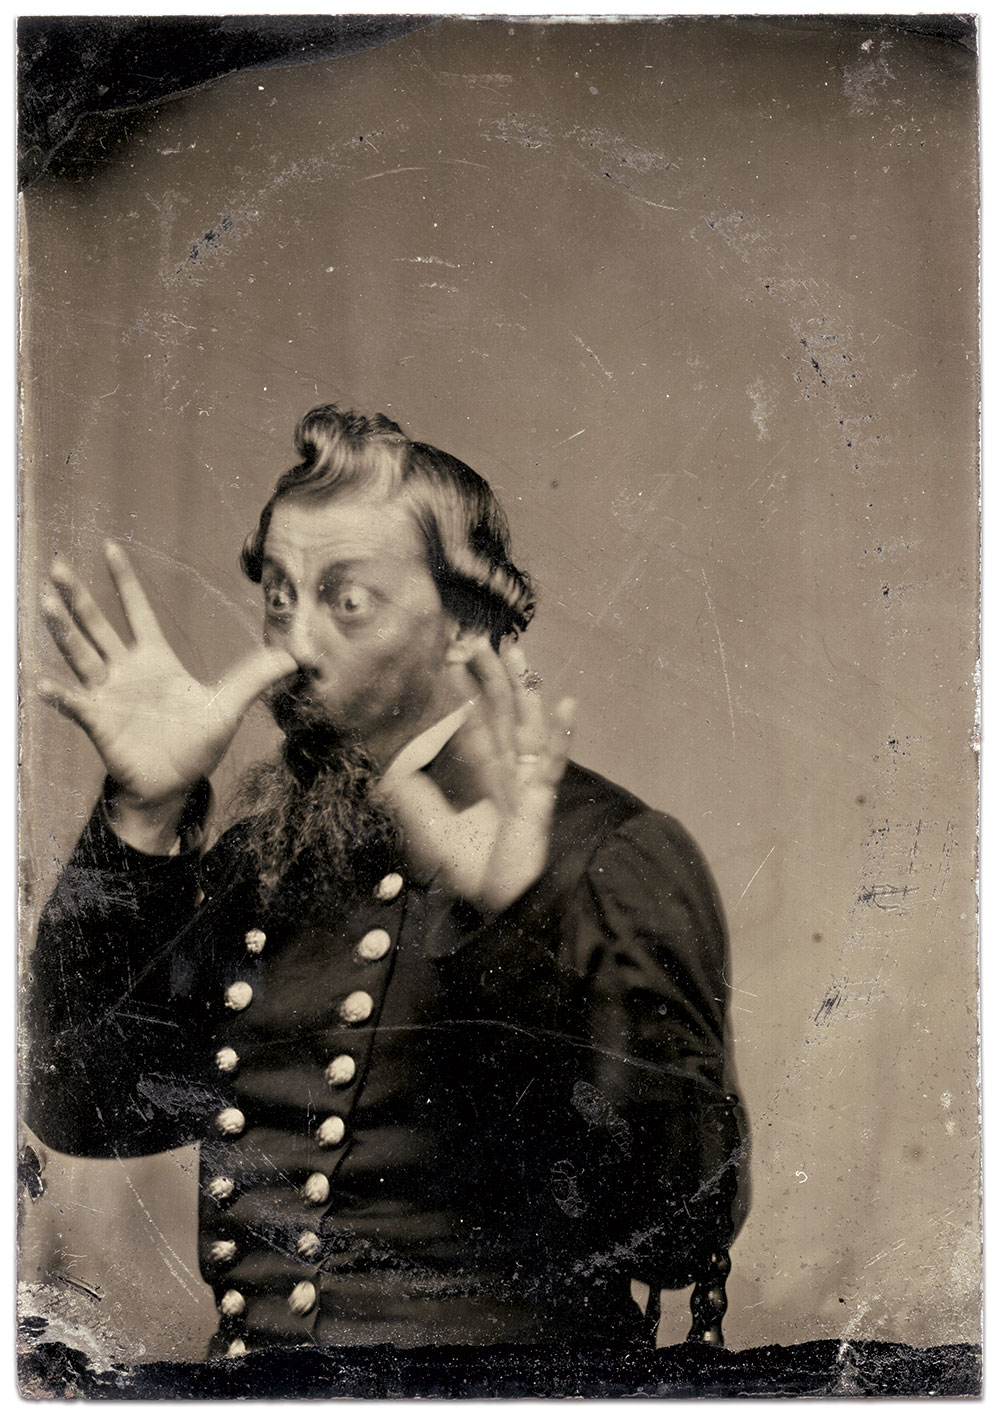 Quarter-plate tintype by an anonymous photographer. Ronald S. Coddington Collection.   